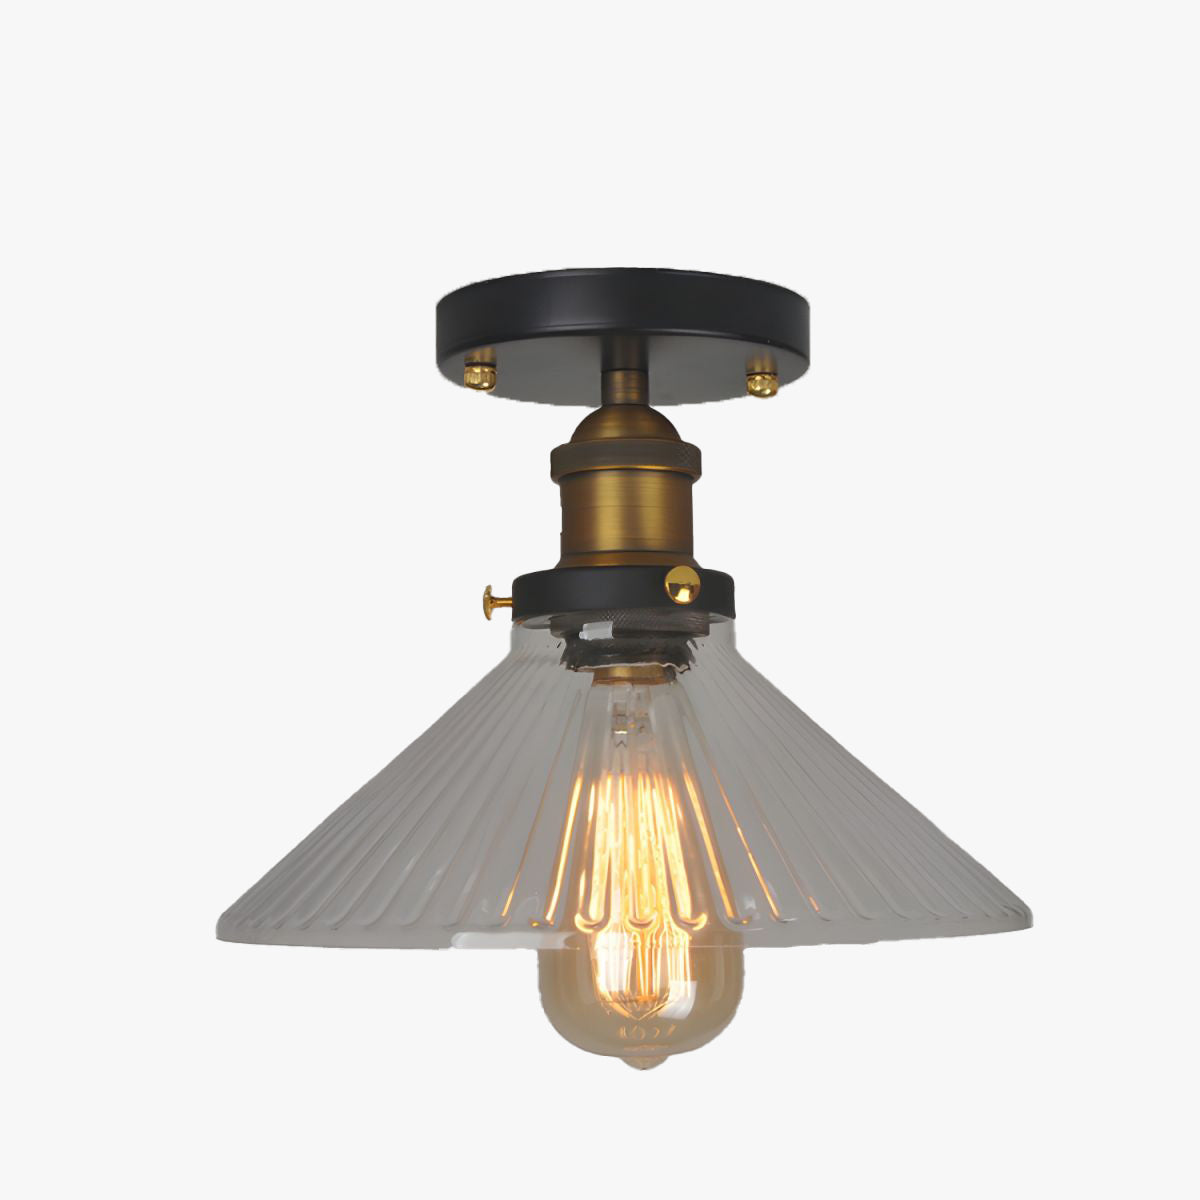 Alessio Industrial Glass Flush Mount Ceiling Light, Black